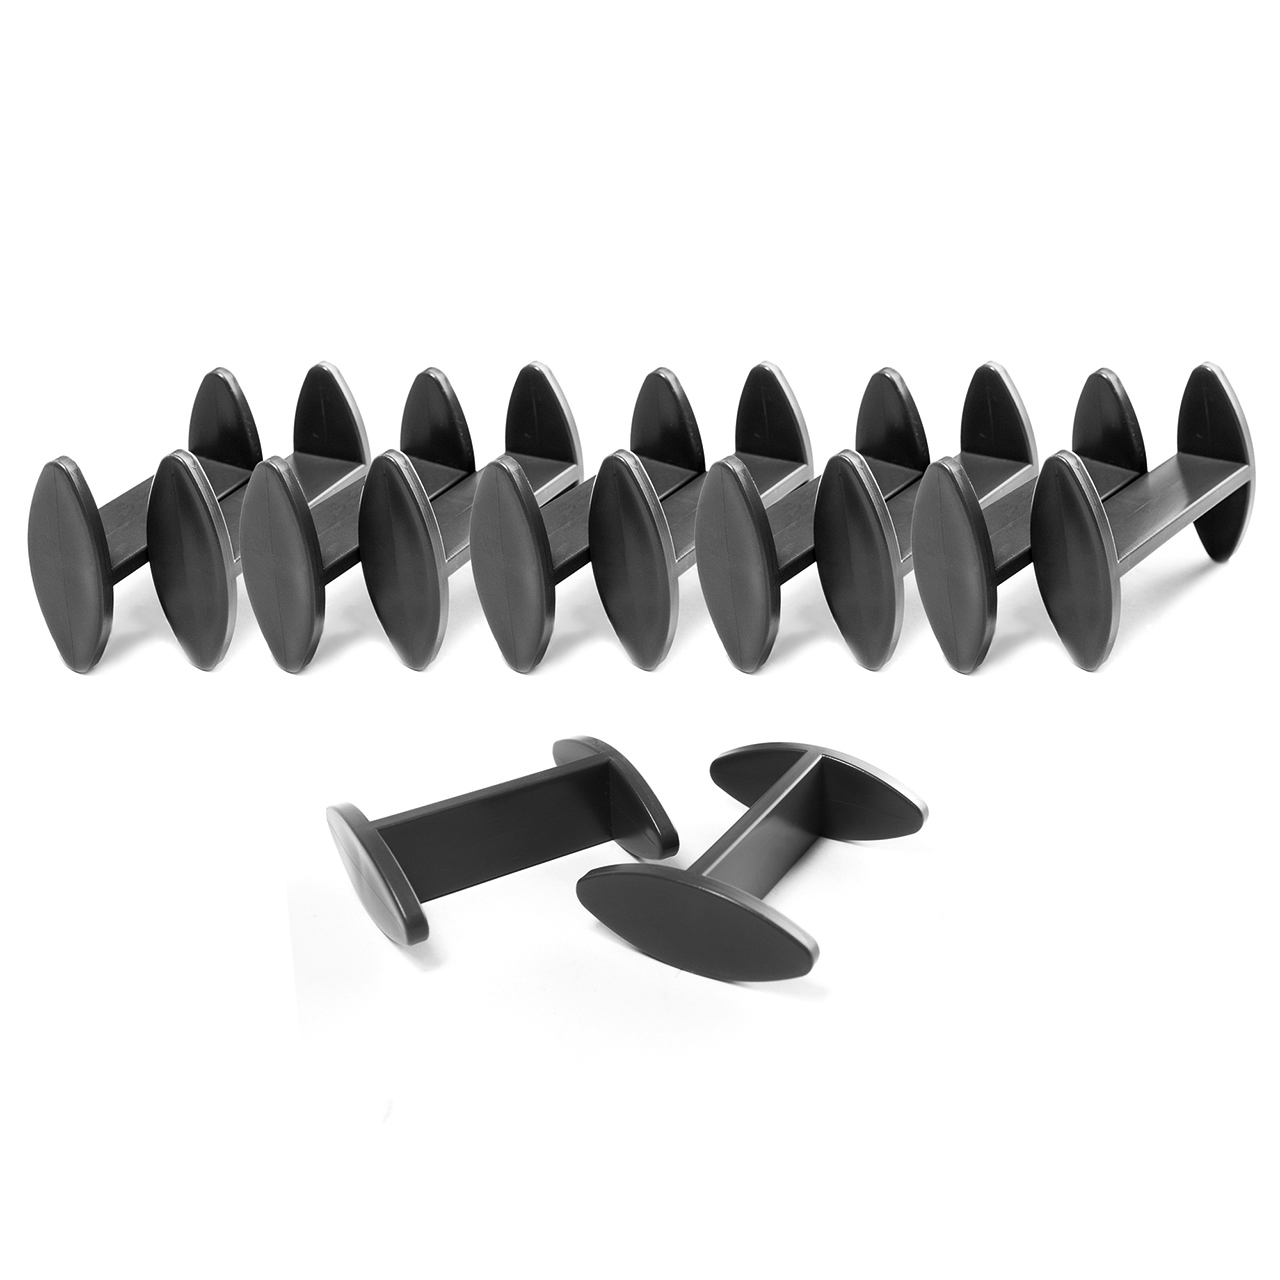 Fence Mate - Pack of 12